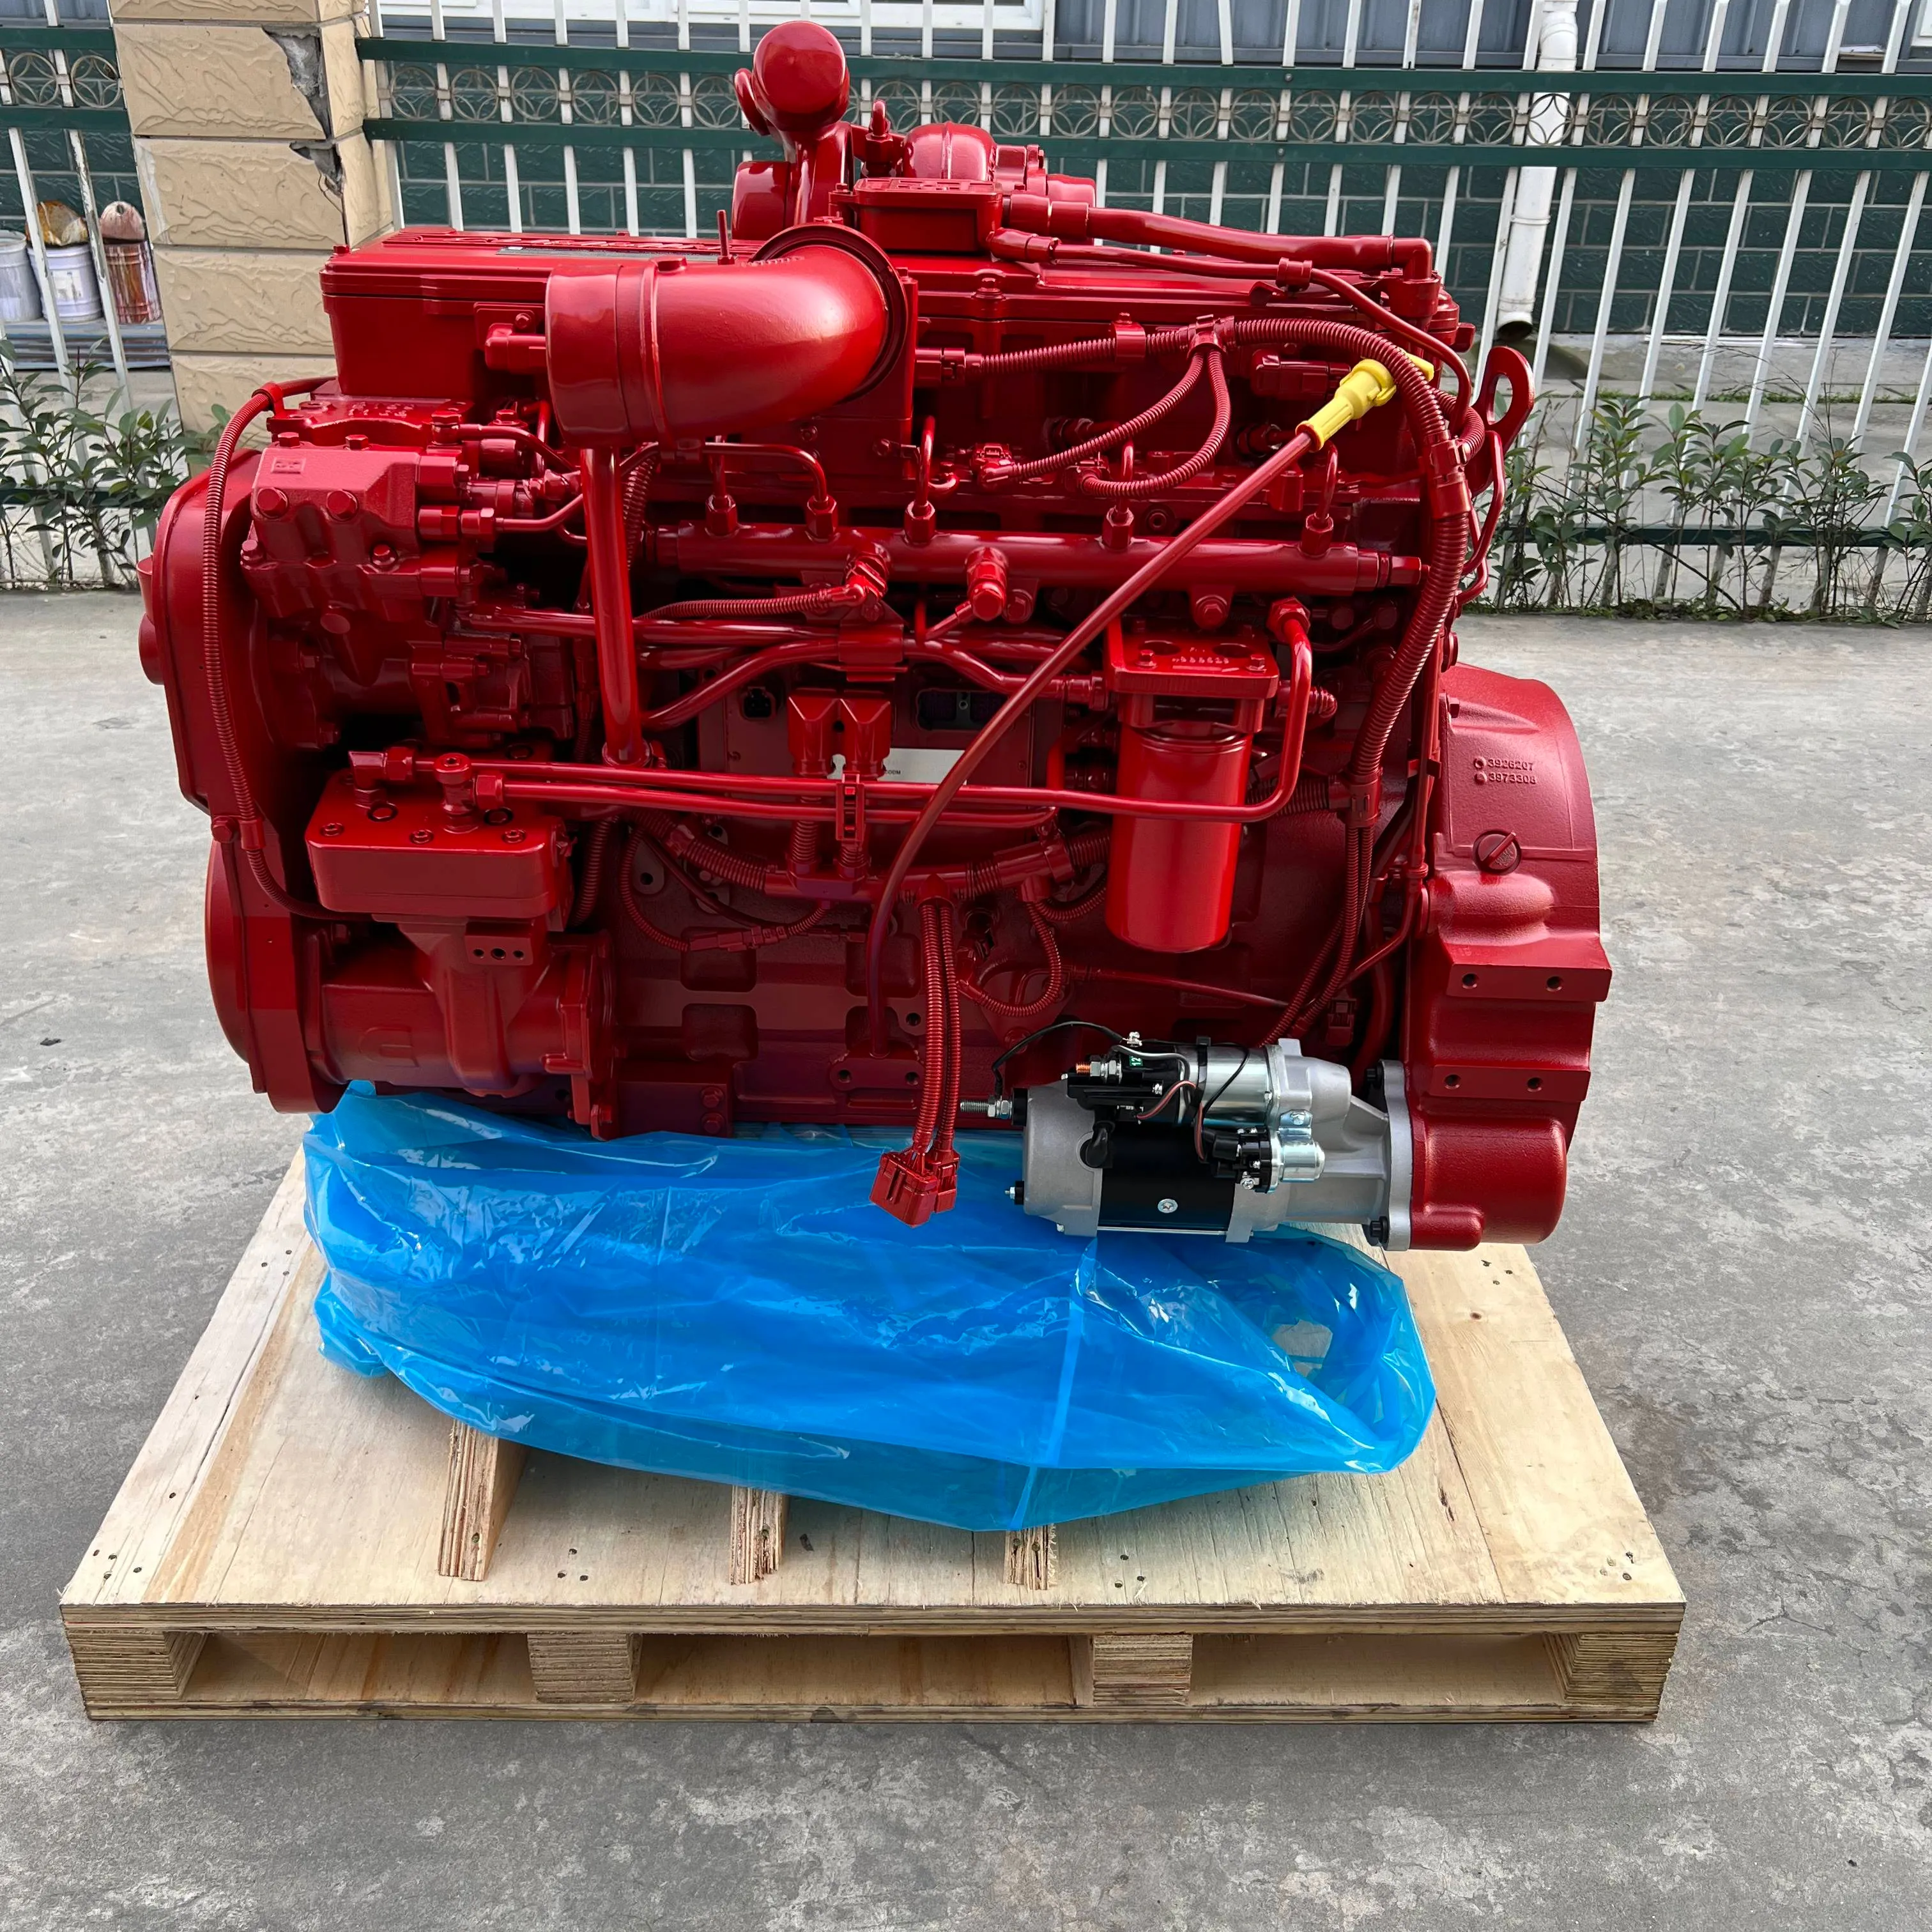 Red color IN STOCK Truck Engines Genuine Cummins ISC Engine motor assembly full engine used for TRUCK